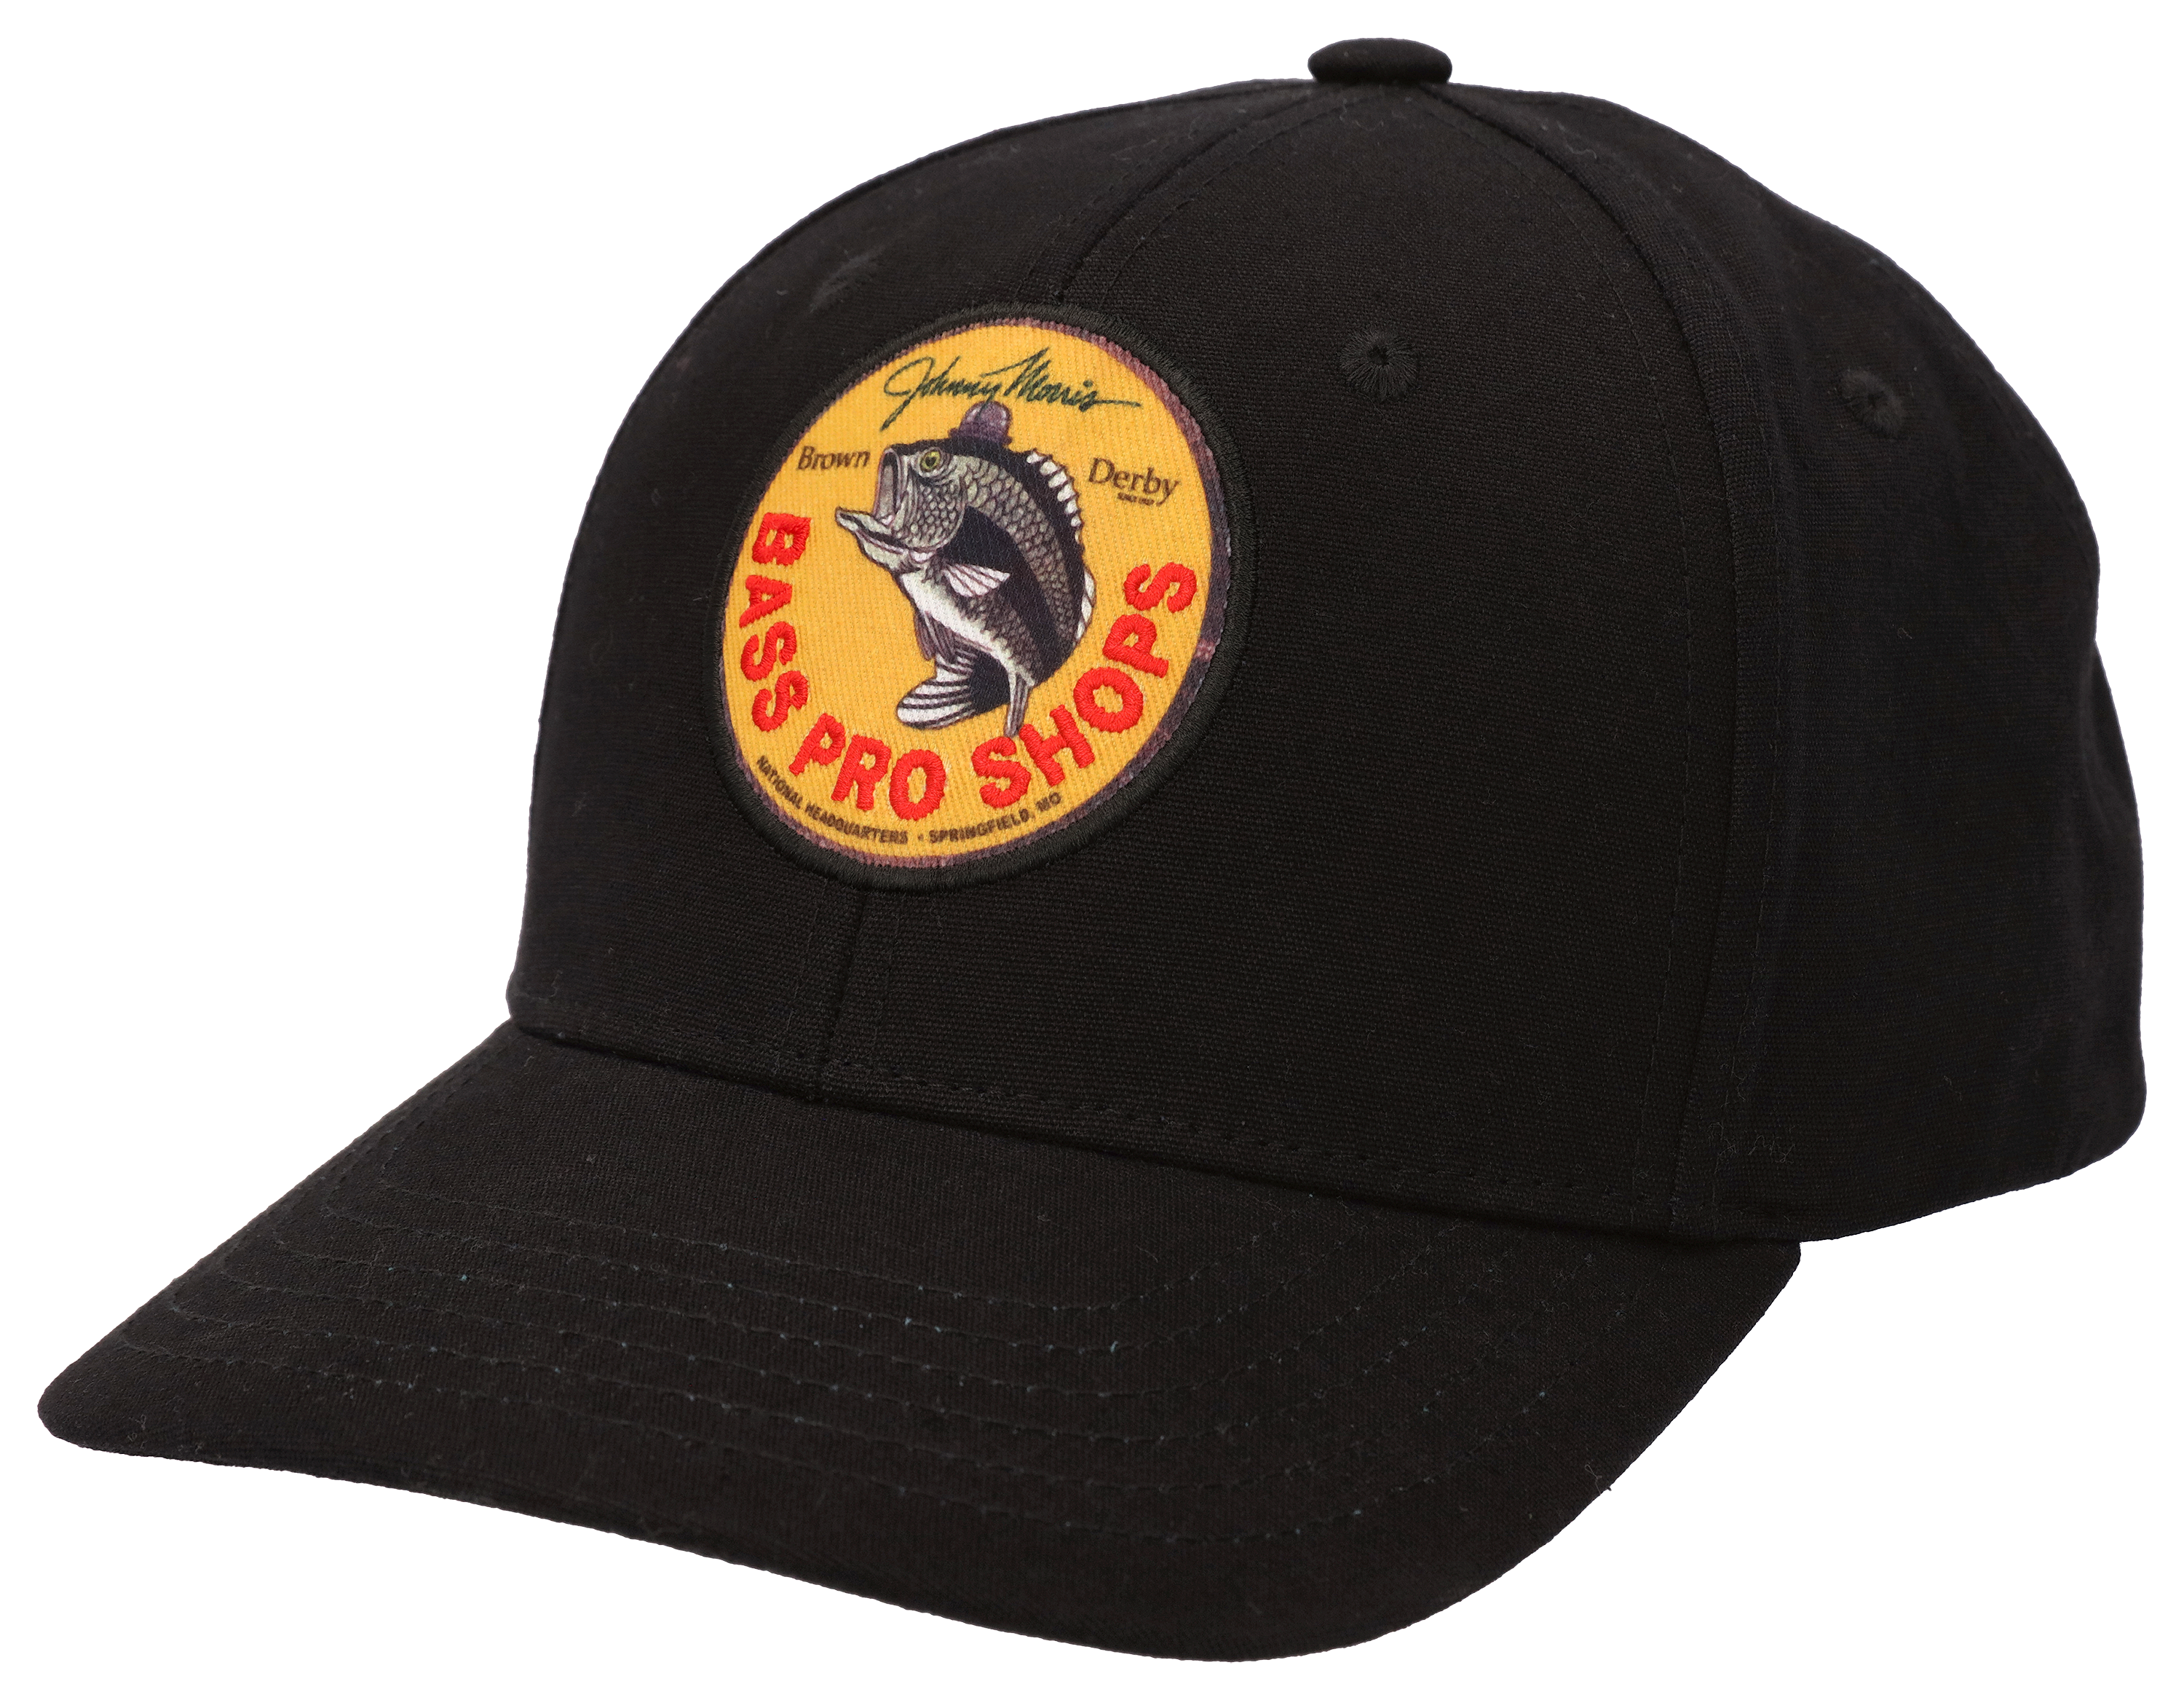 Bass pro shops hats all colors available  Bass pro shop hat, Bass pro  shop, Bass pro shops